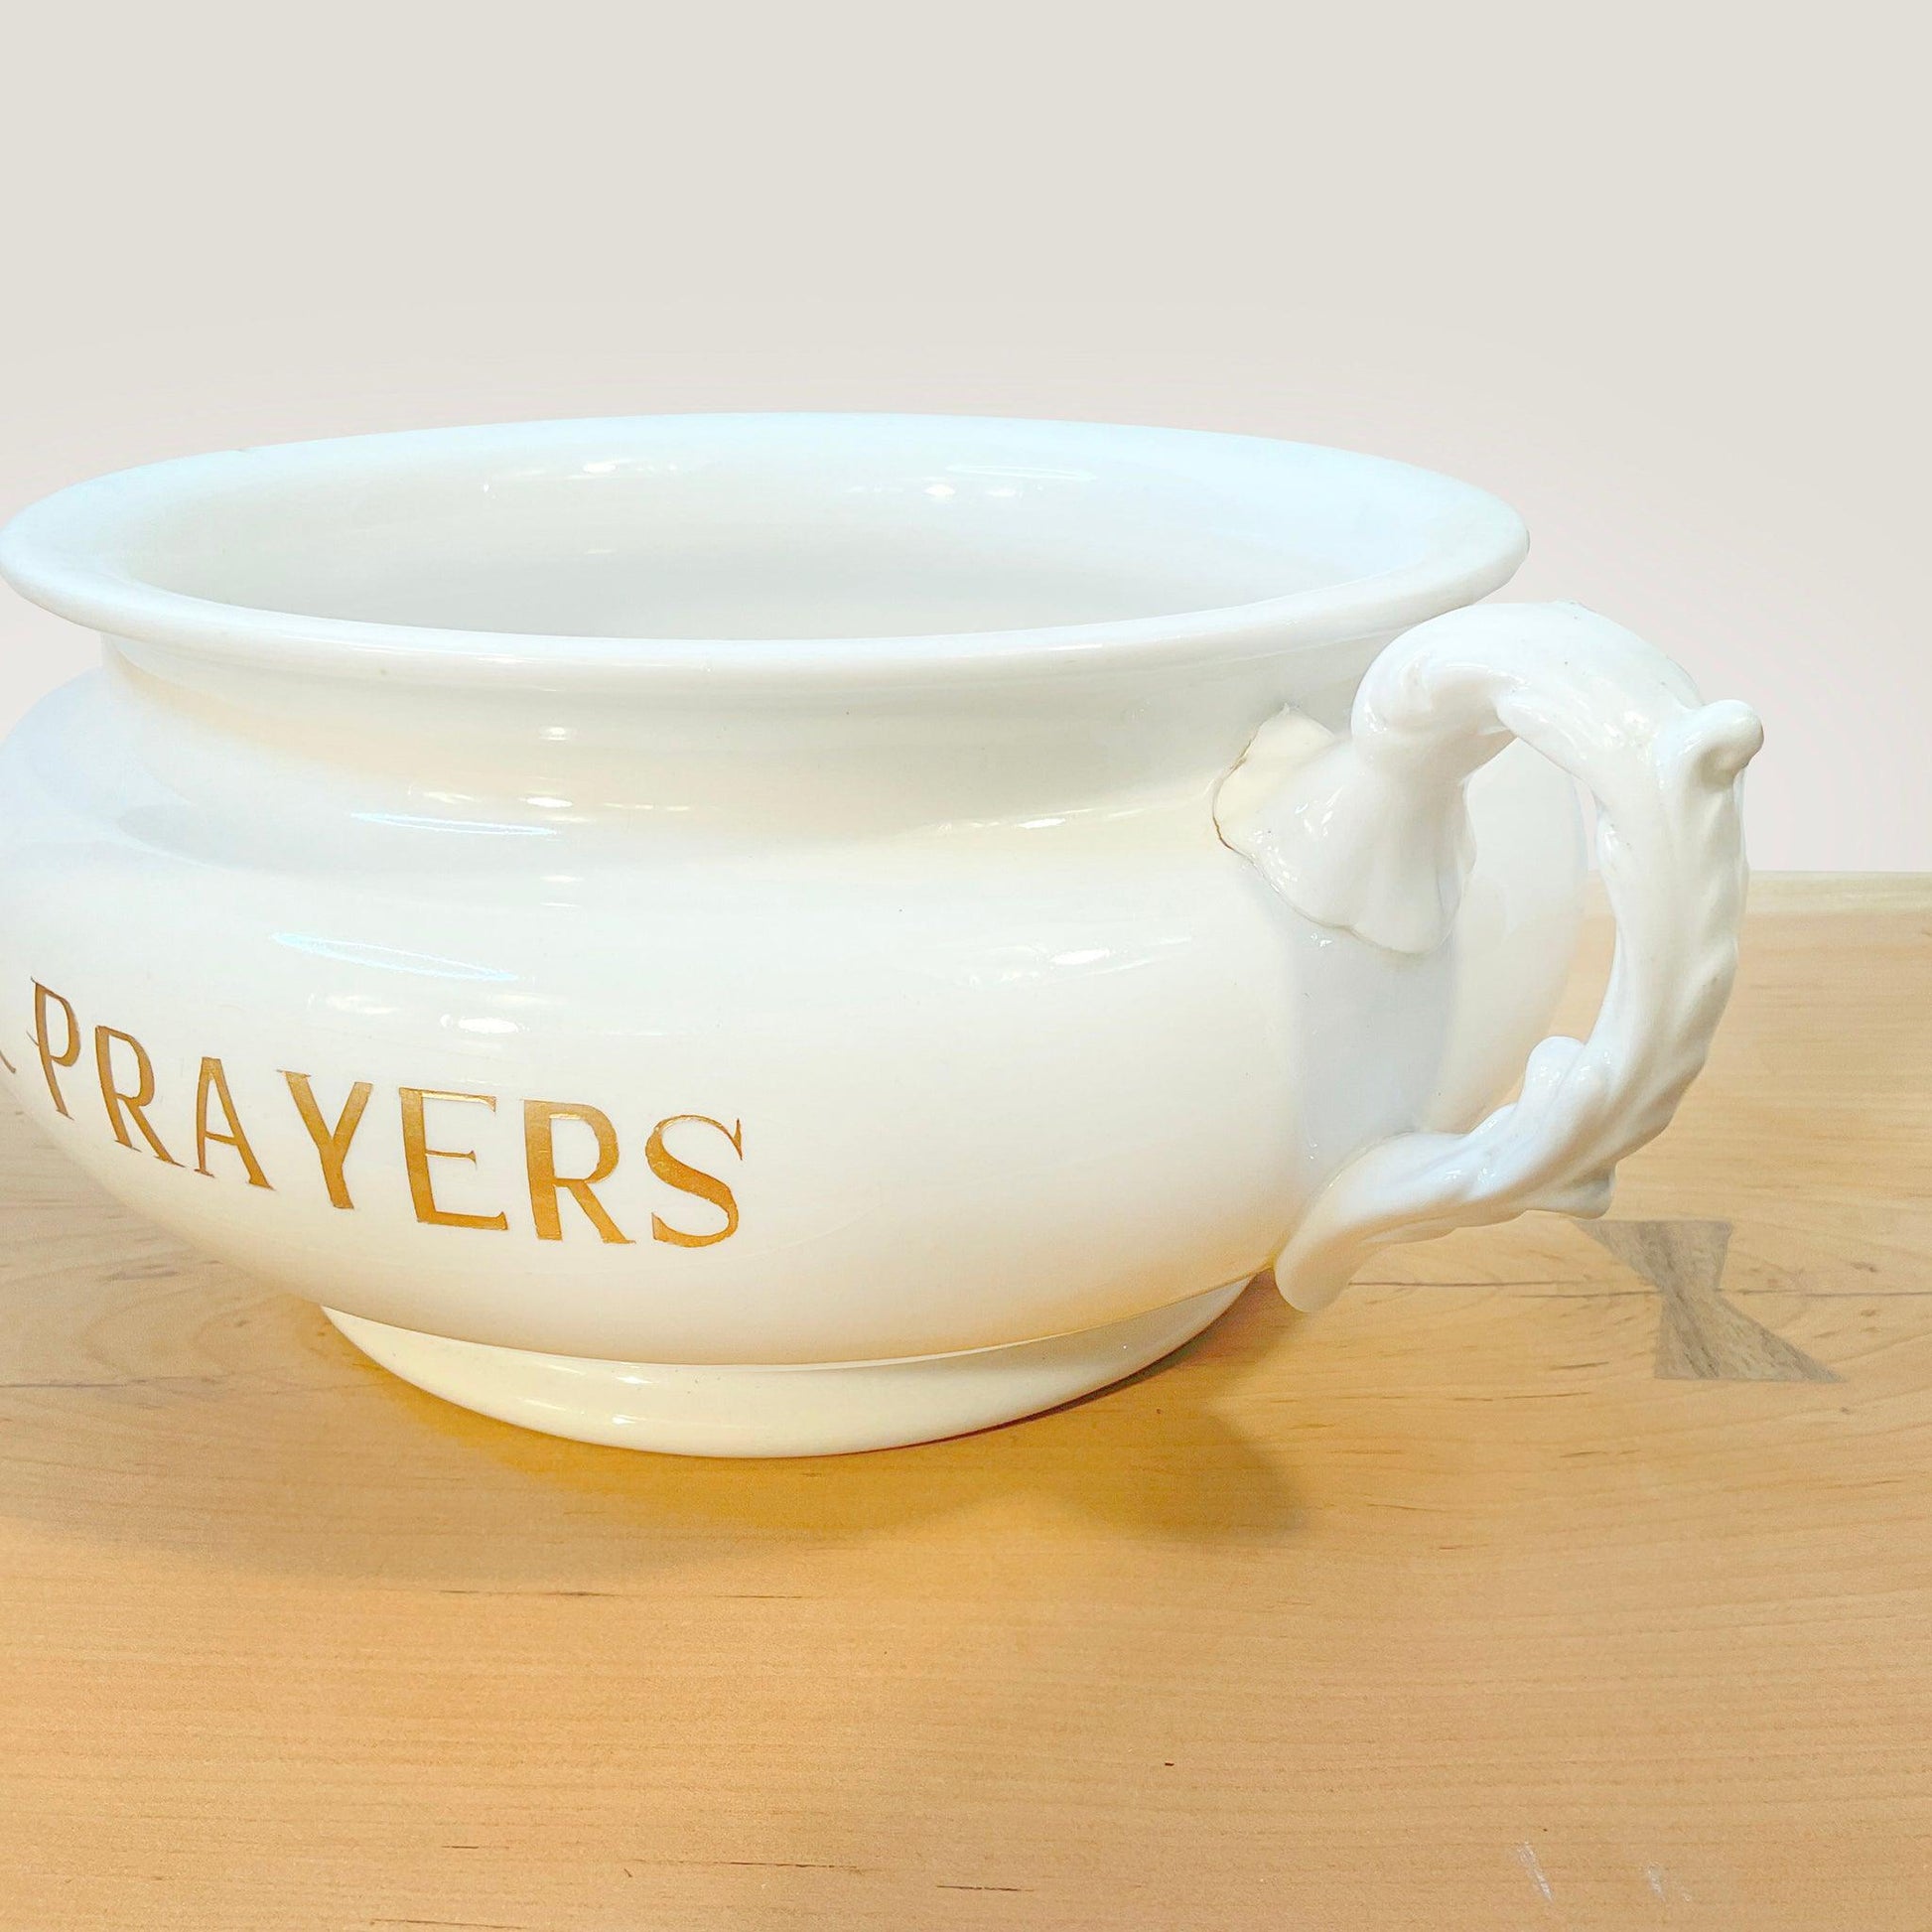 Thoughts & Prayers Chamber Pot - Offensively Domestic